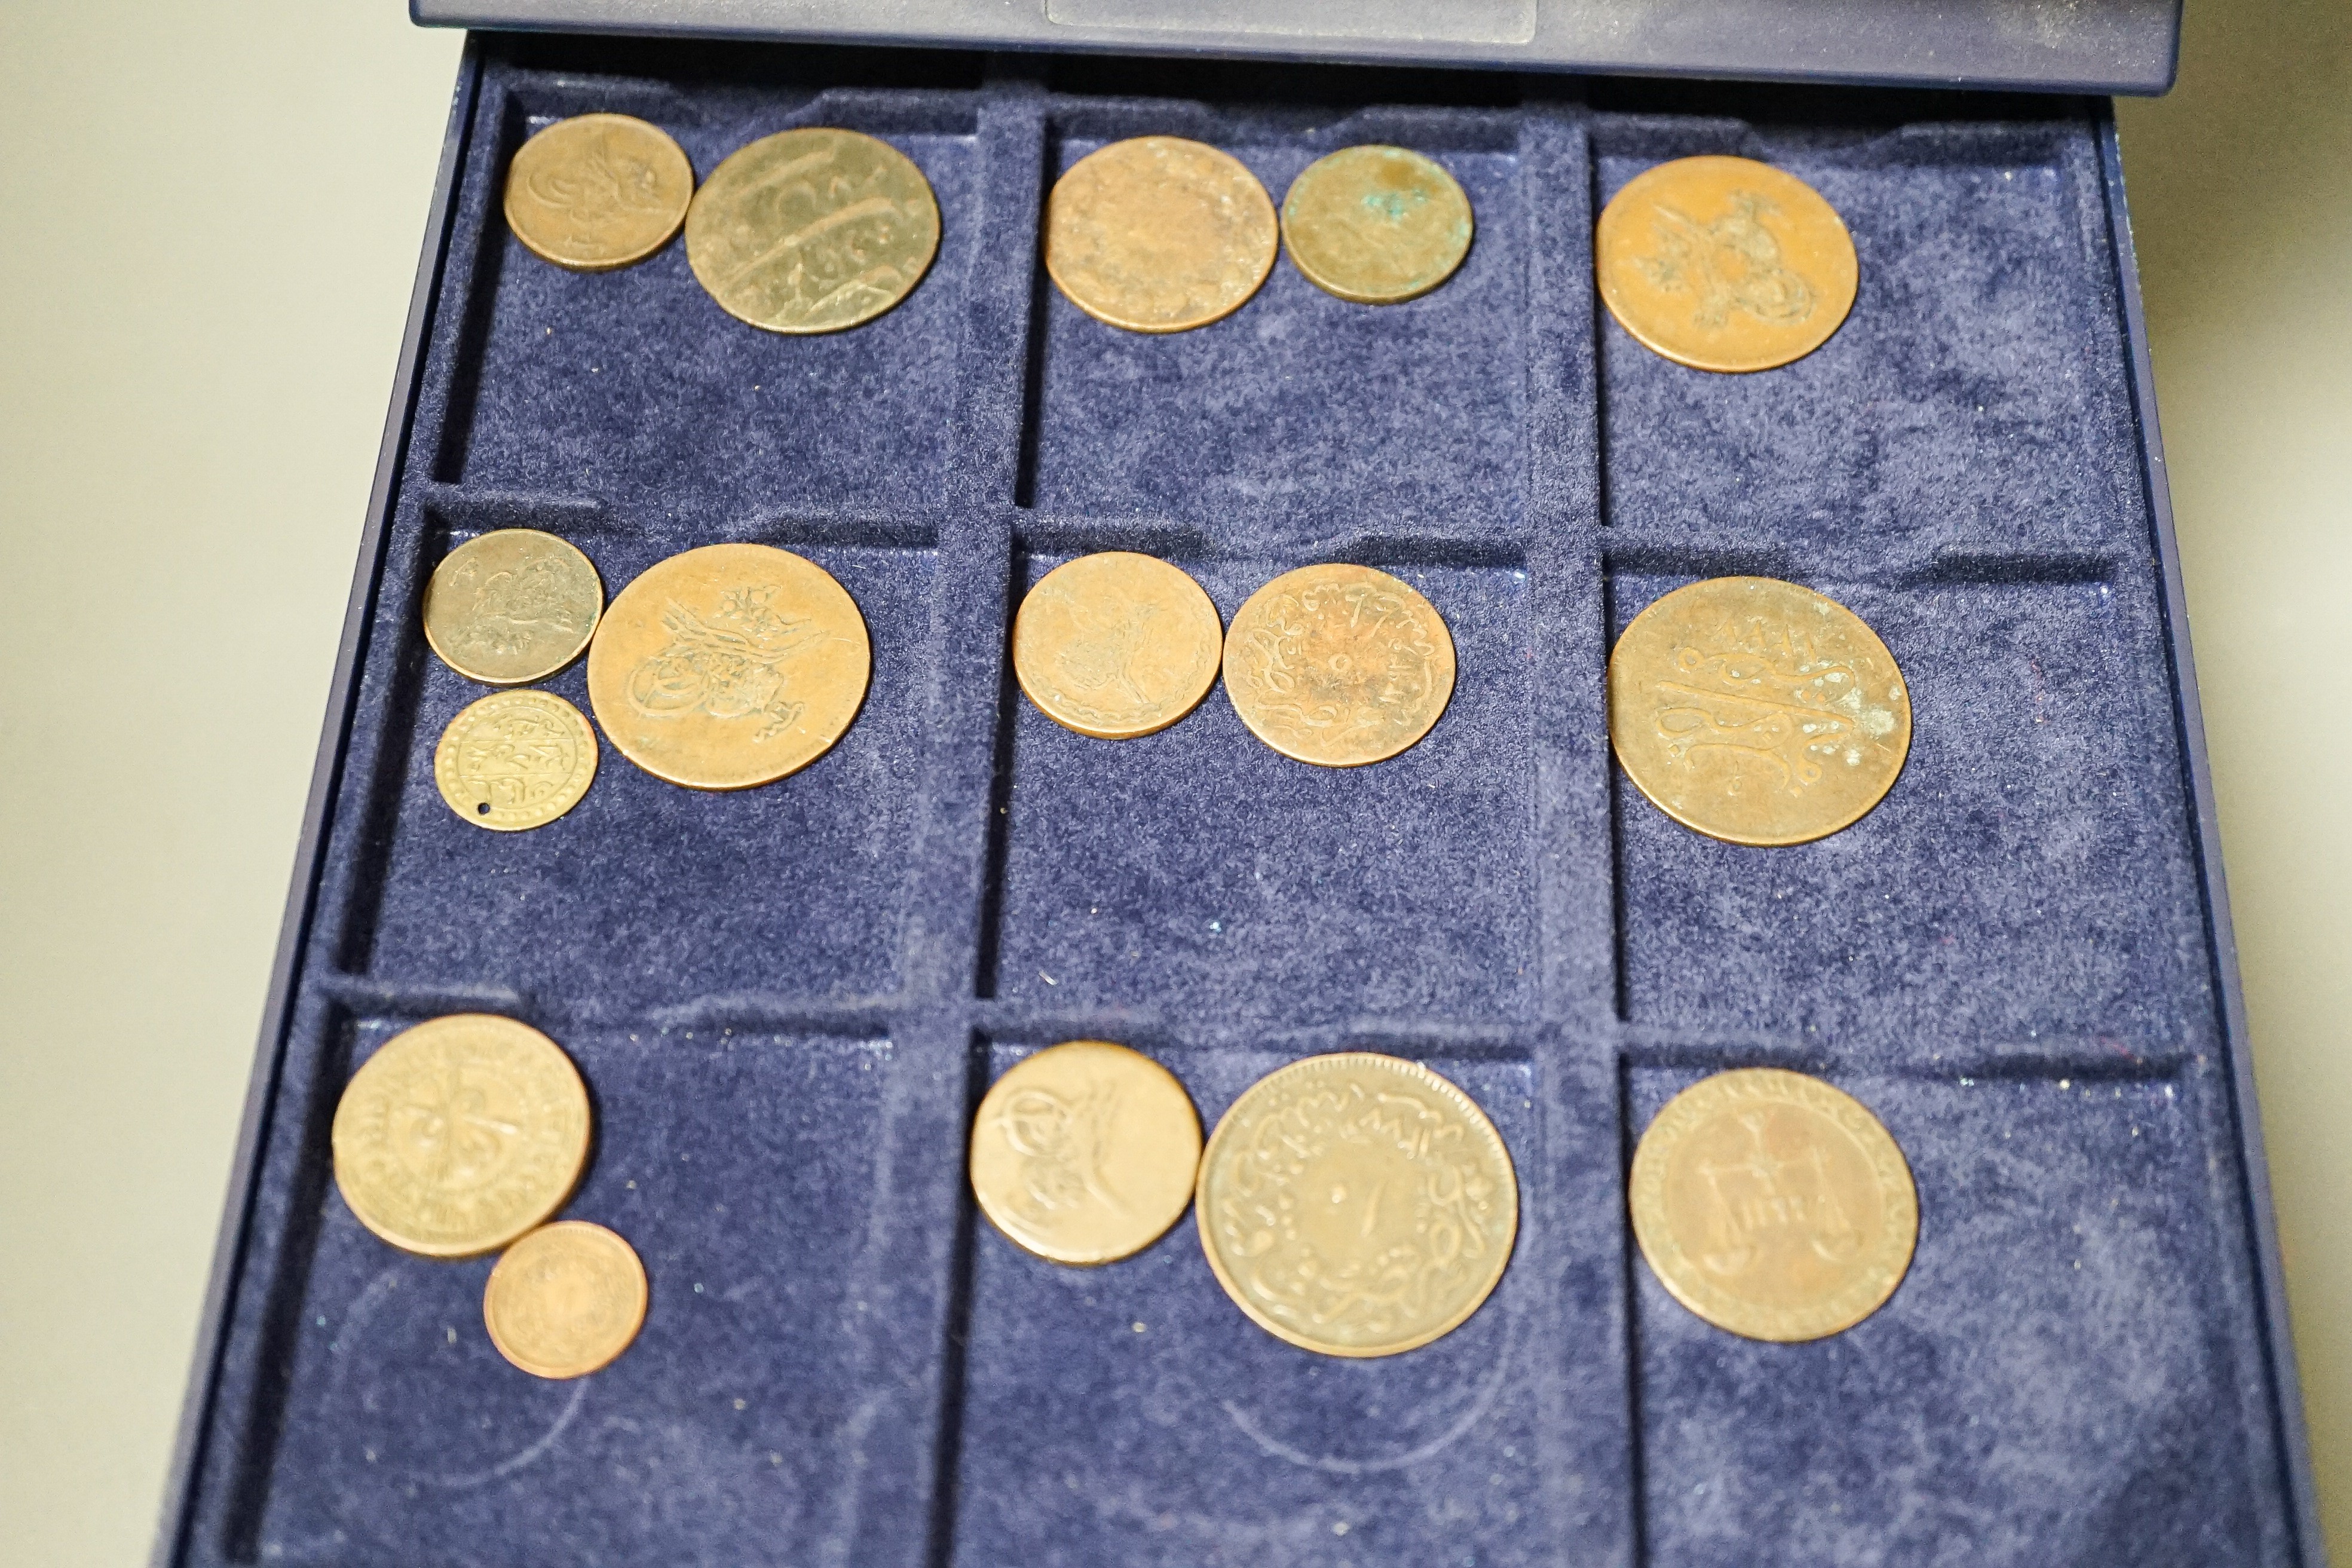 Ottoman Empire and Islamic coins, 19th/20th century, silver and bronze coinage, 12 trays